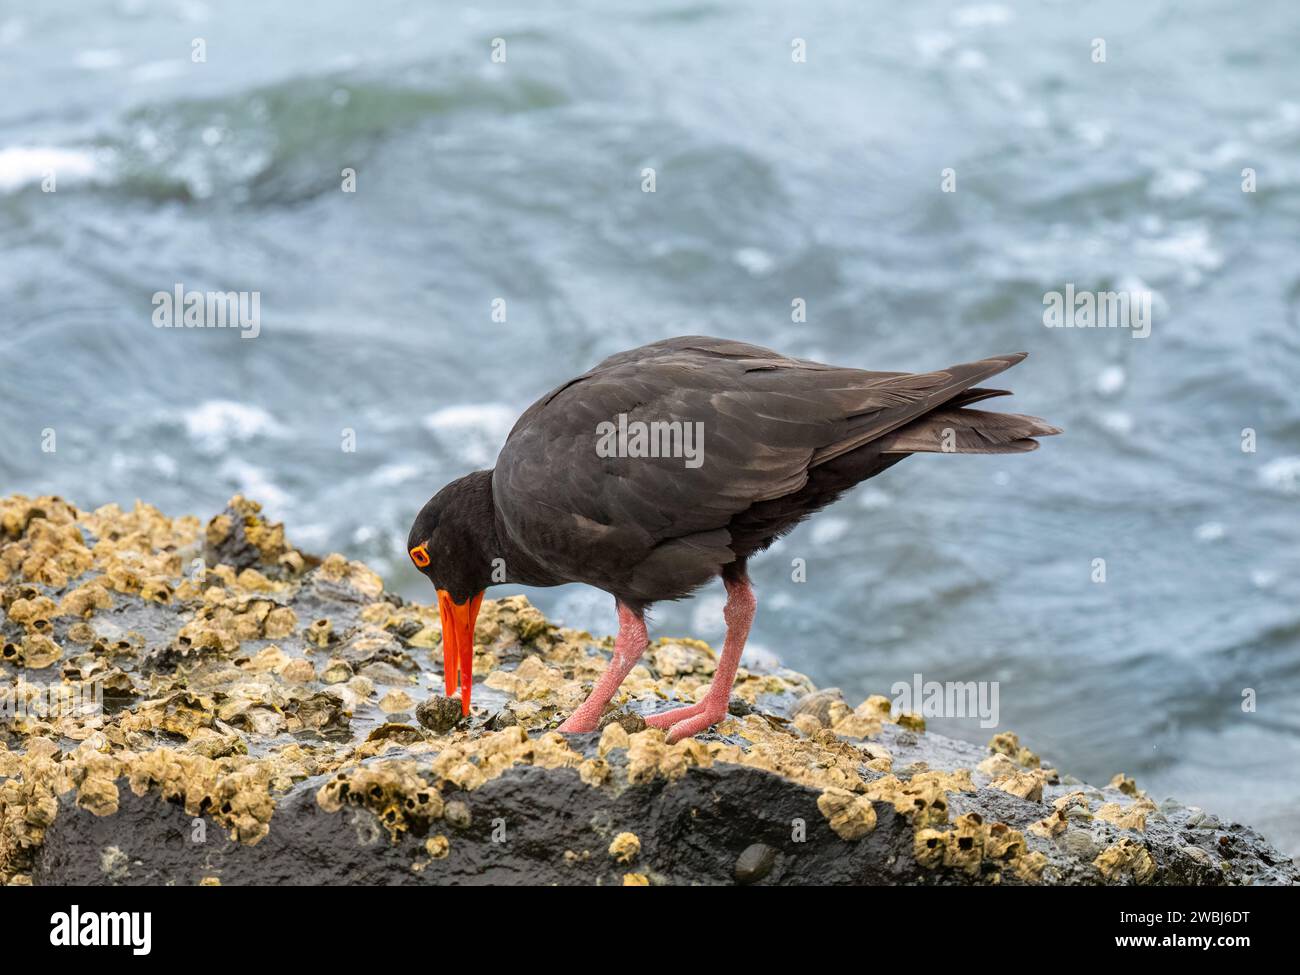 The Sooty Oystercatcher (Haematopus fuliginosus)  black shorebird with a long orange-red bill, red eyes and stout red-pink legs. Collecting food. Stock Photo